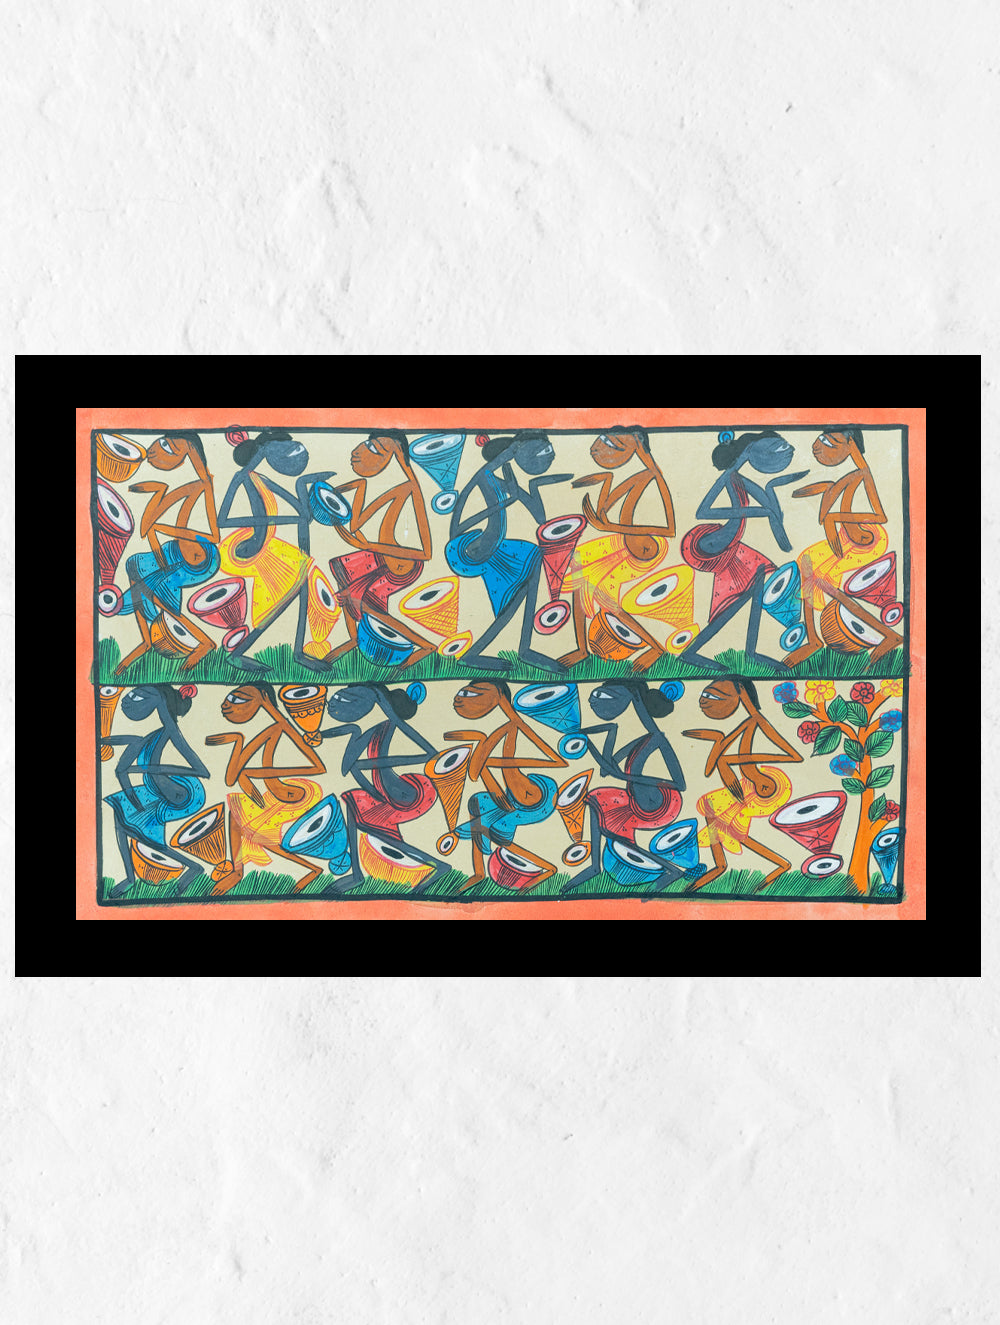 Load image into Gallery viewer, Santhal Art Painting - Procession